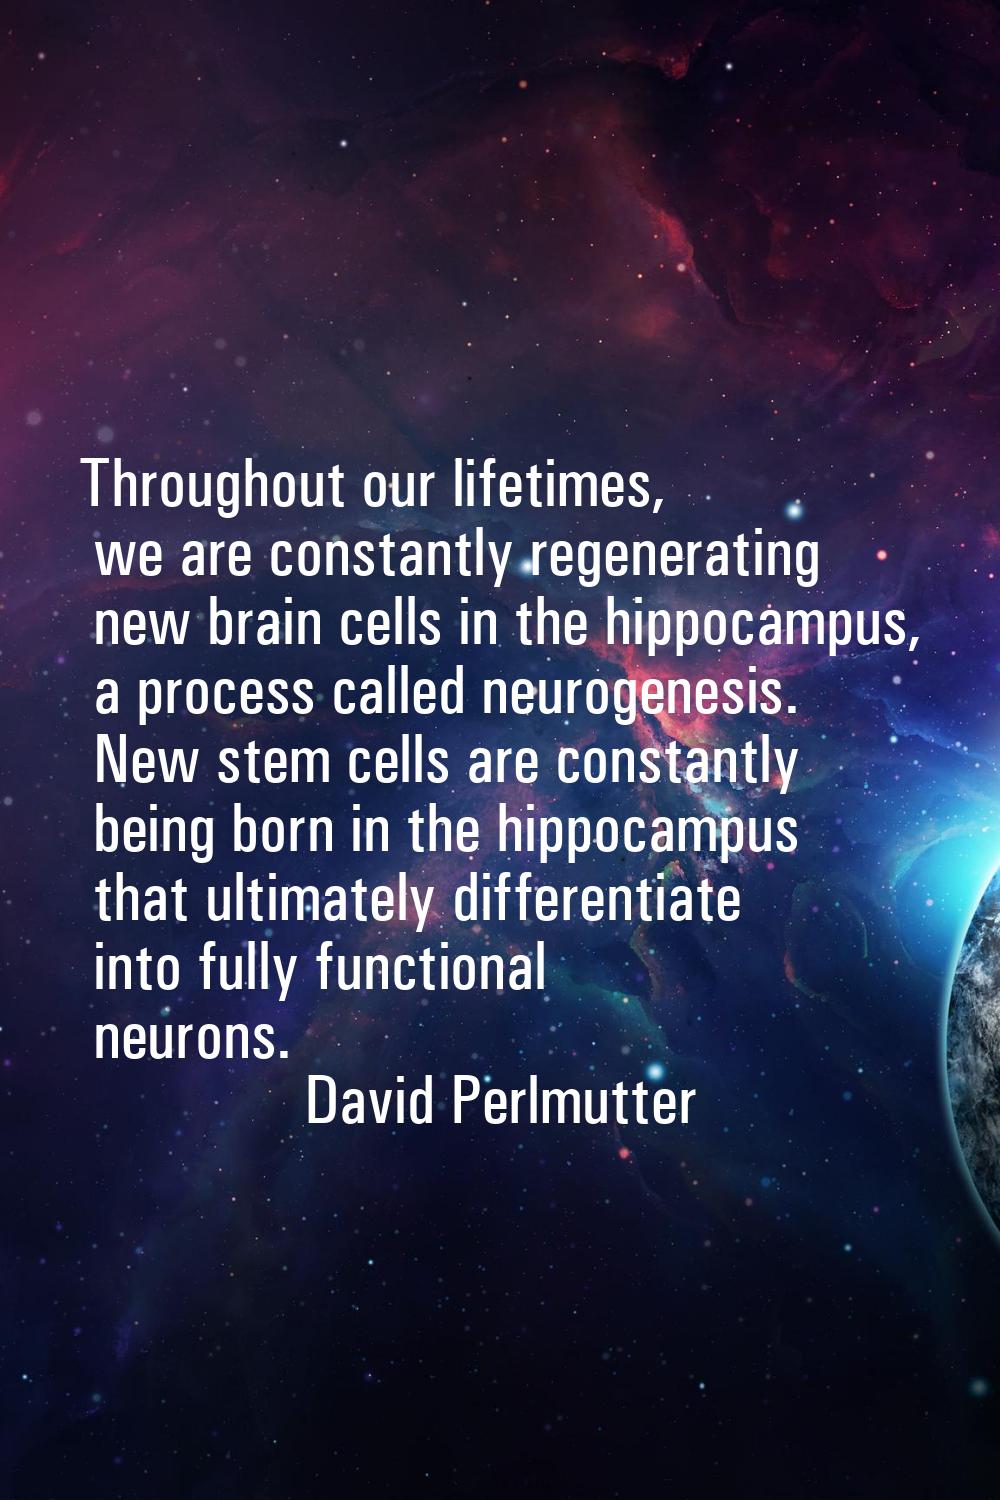 Throughout our lifetimes, we are constantly regenerating new brain cells in the hippocampus, a proc